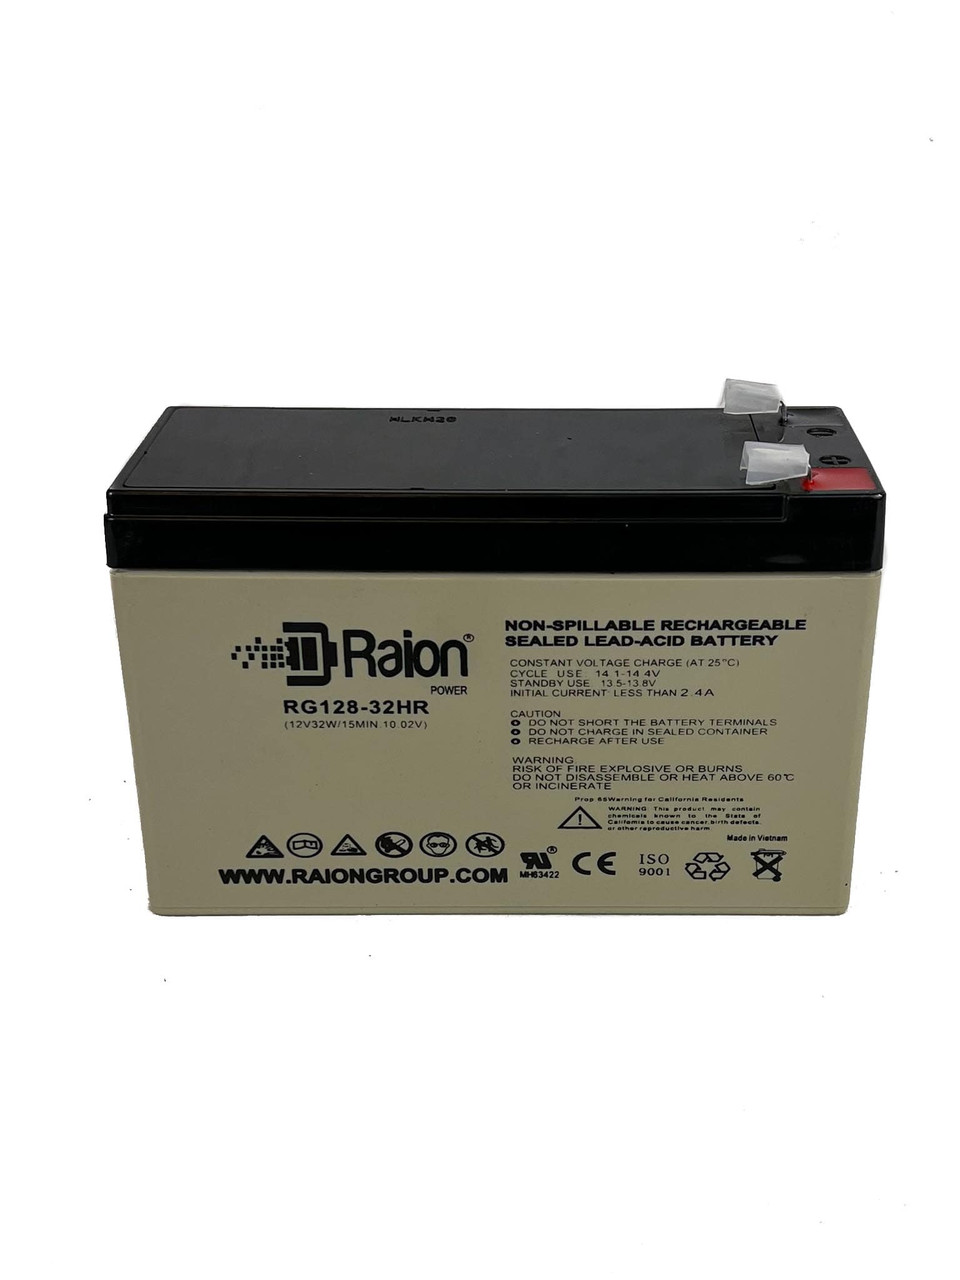 Raion Power RG128-32HR Replacement High Rate Battery Cartridge for Belkin F6C525-SER